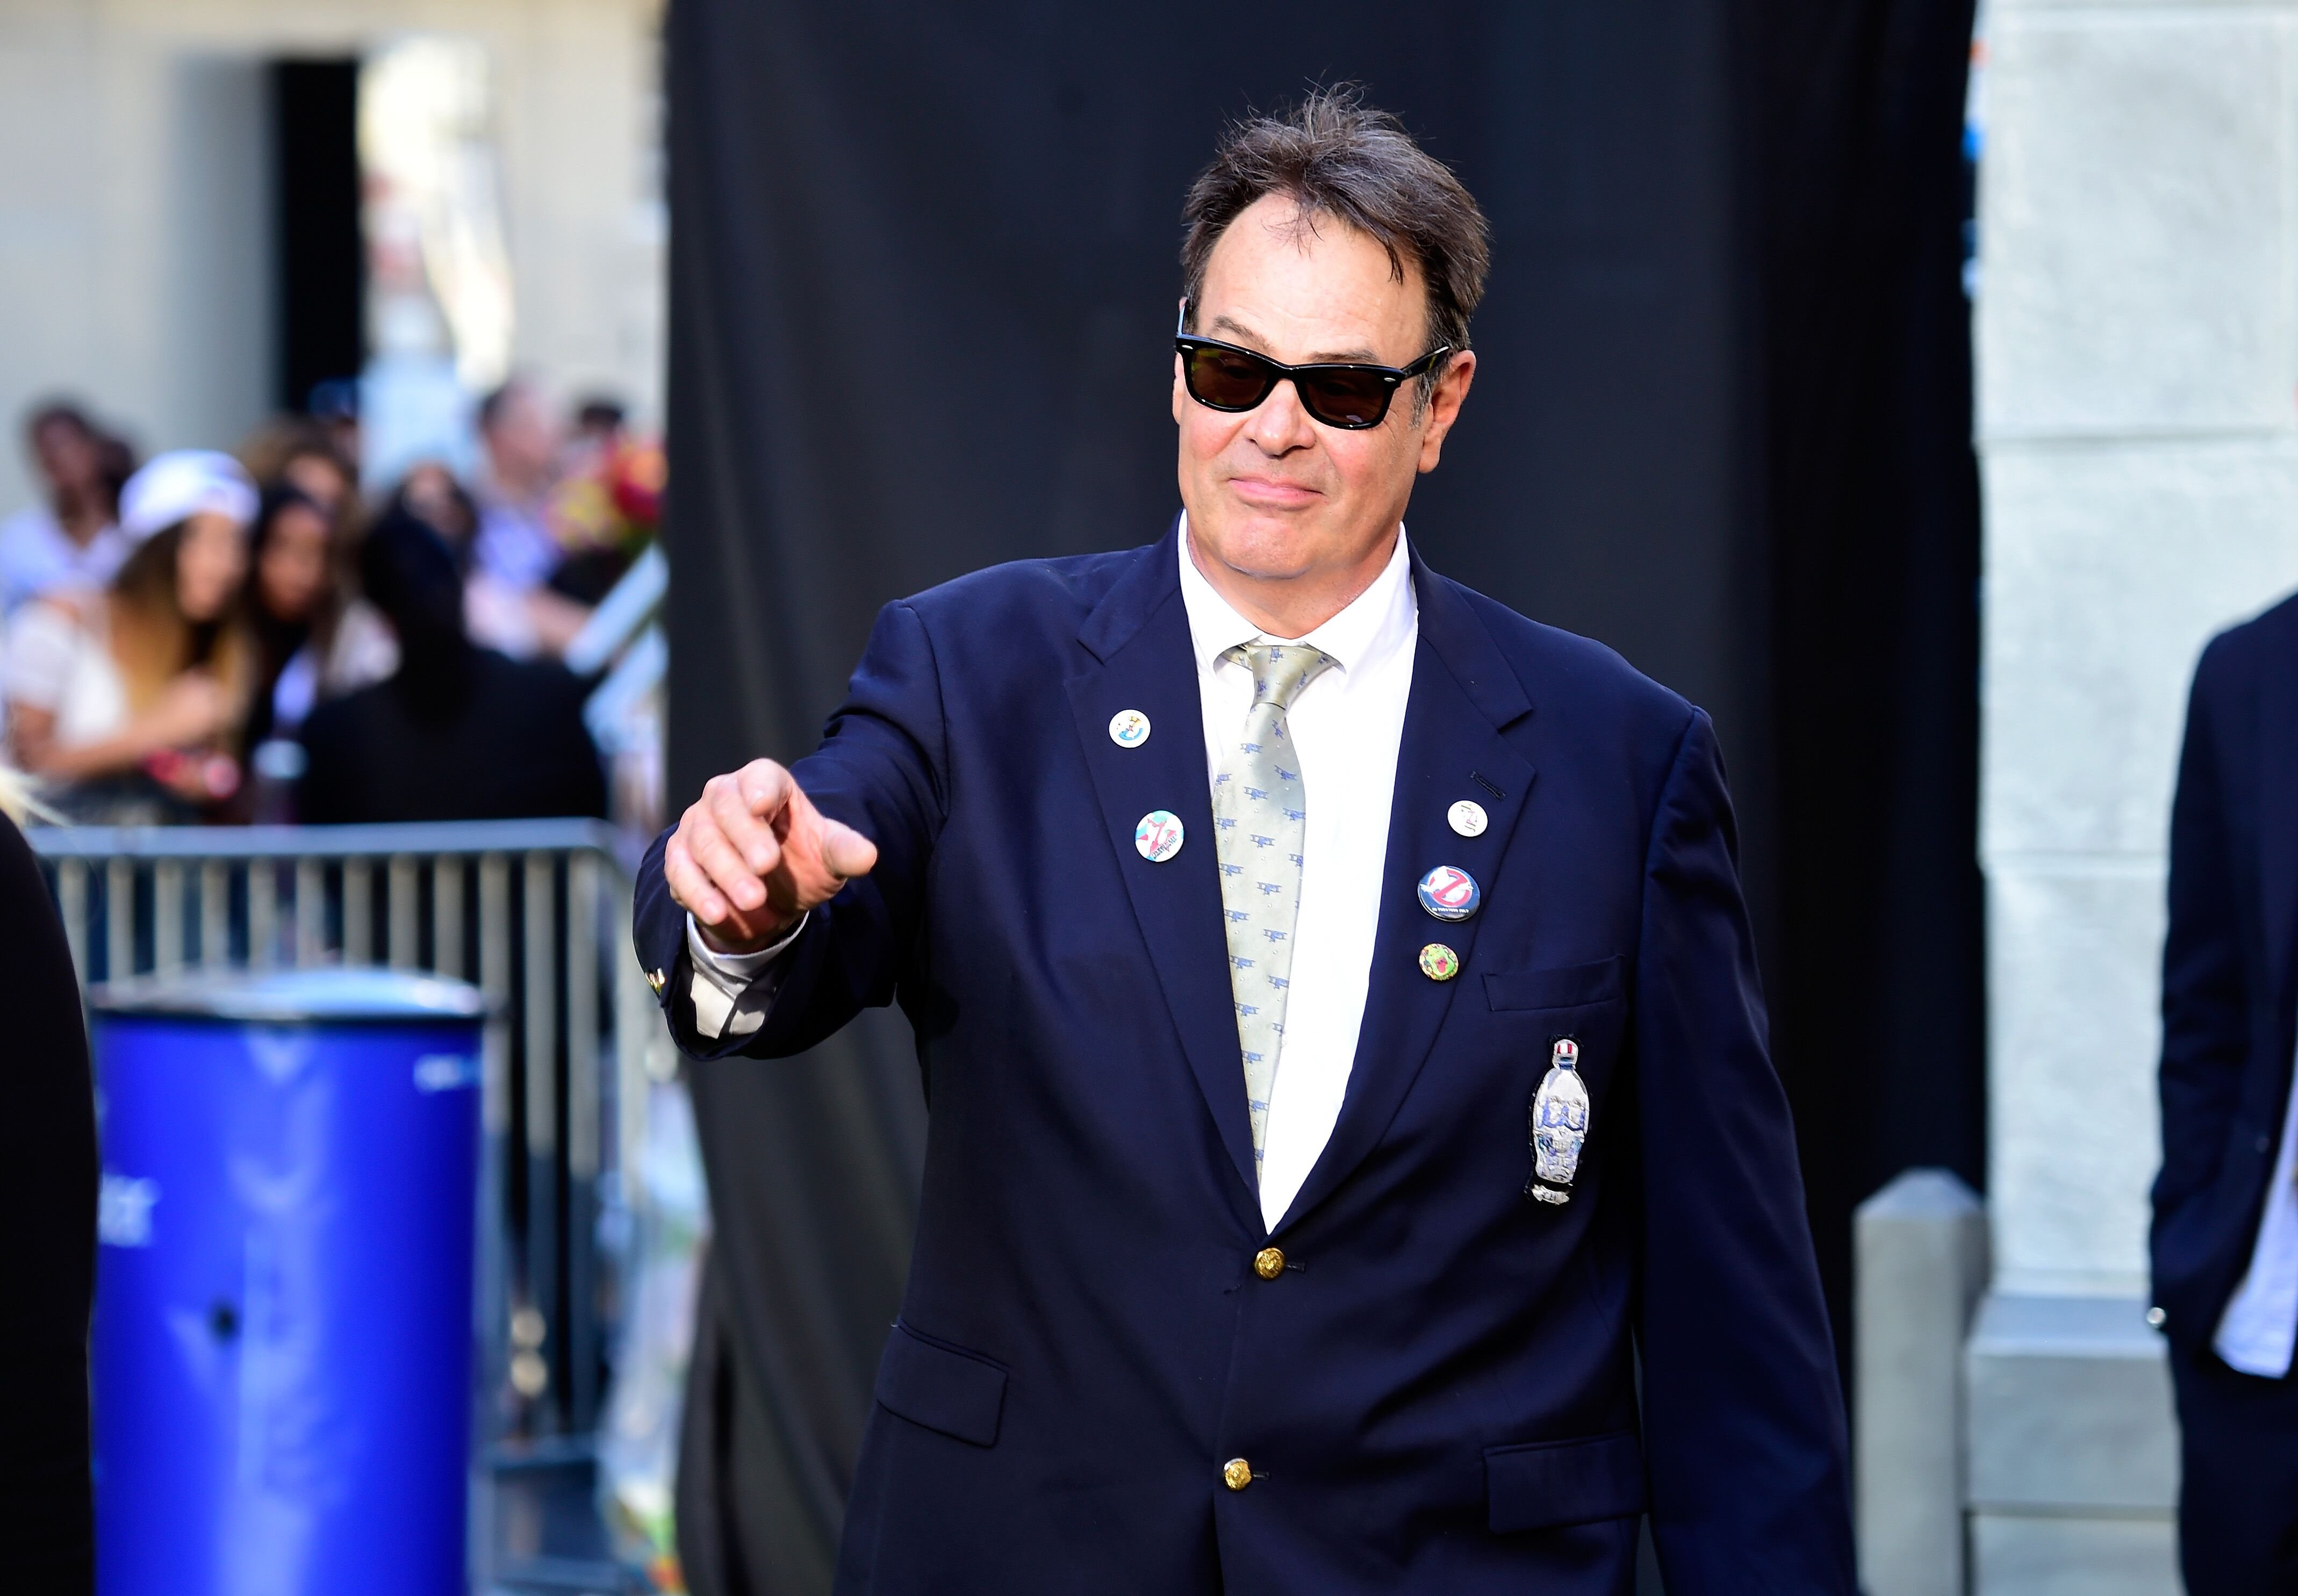 Dan Aykroyd arrives at the Premiere of Sony Pictures' "Ghostbusters" at TCL Chinese Theatre. | Source: Getty Images